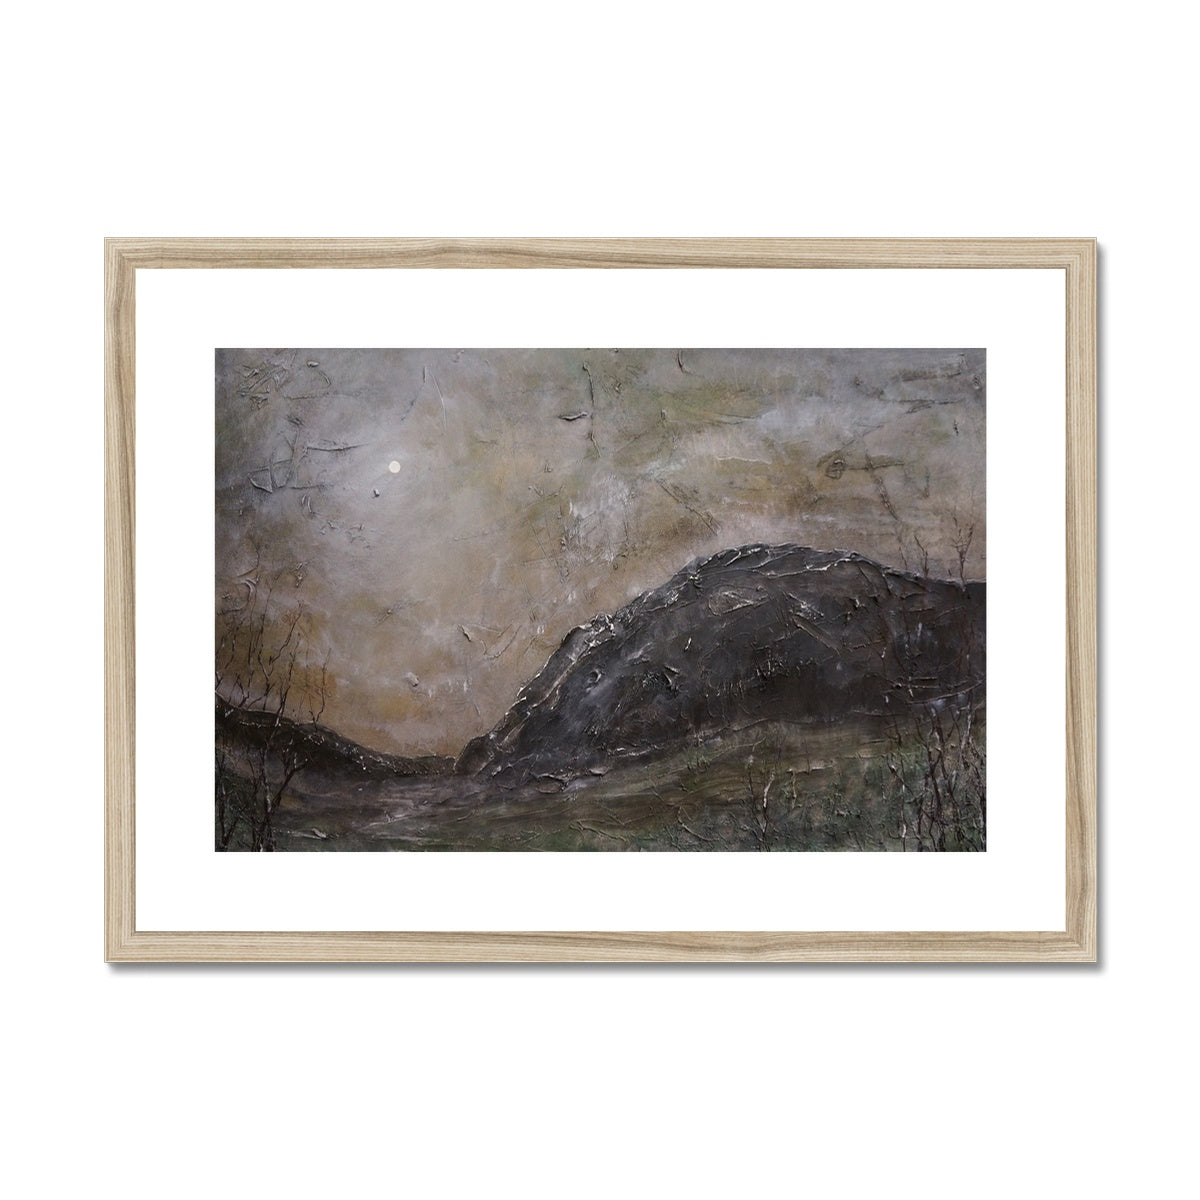 Glen Nevis Moonlight Painting | Framed & Mounted Prints From Scotland-Framed & Mounted Prints-Scottish Lochs & Mountains Art Gallery-A2 Landscape-Natural Frame-Paintings, Prints, Homeware, Art Gifts From Scotland By Scottish Artist Kevin Hunter